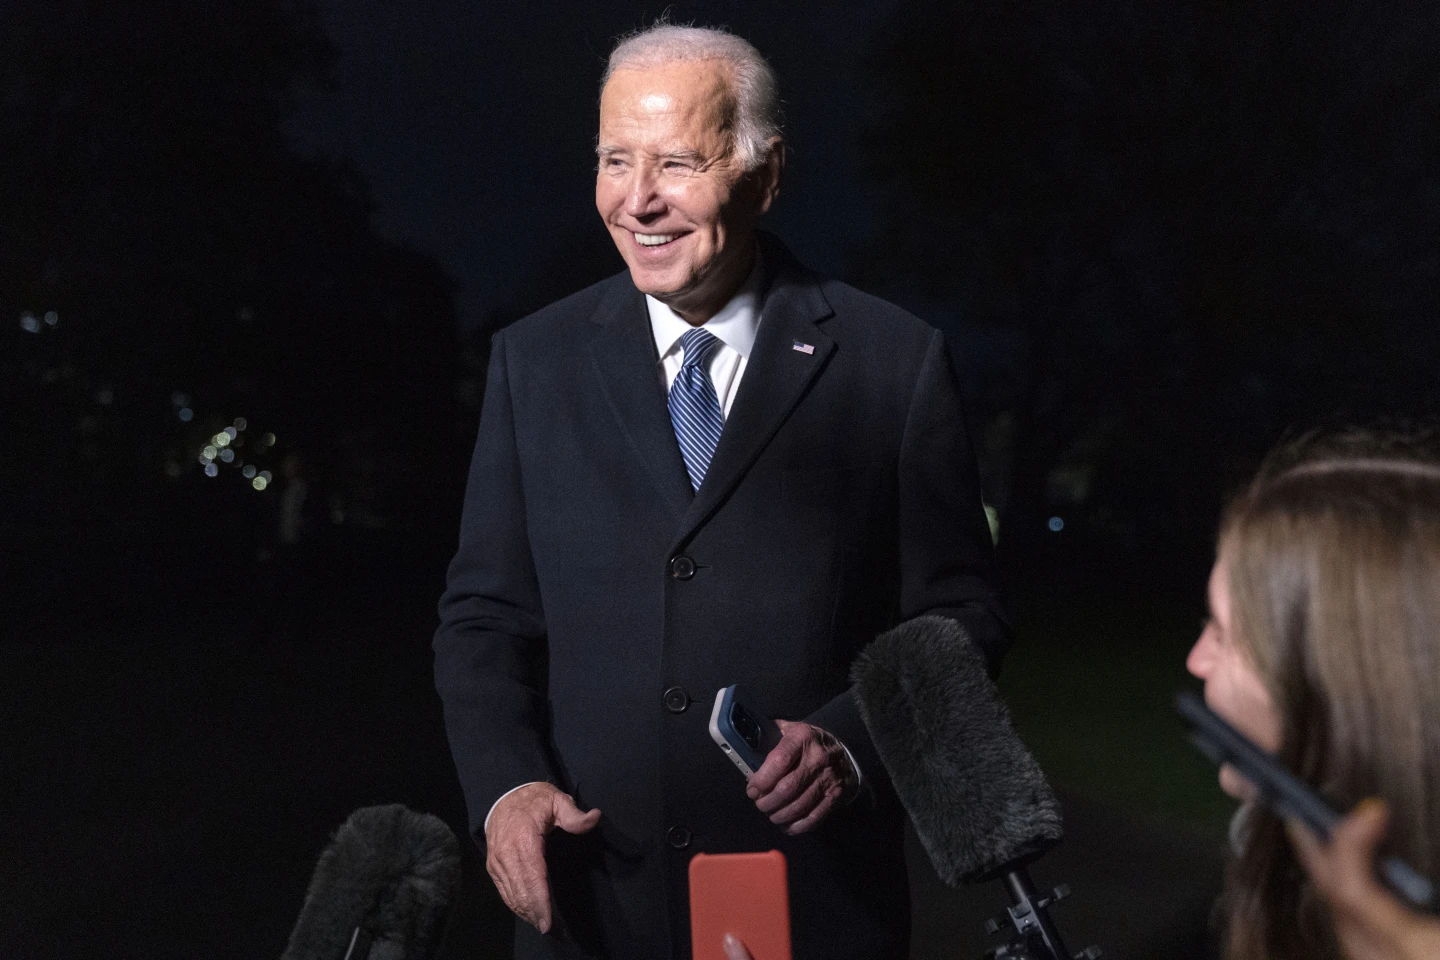 Biden tells donors: ‘If Trump wasn’t running I’m not sure I’d be running. We cannot let him win’